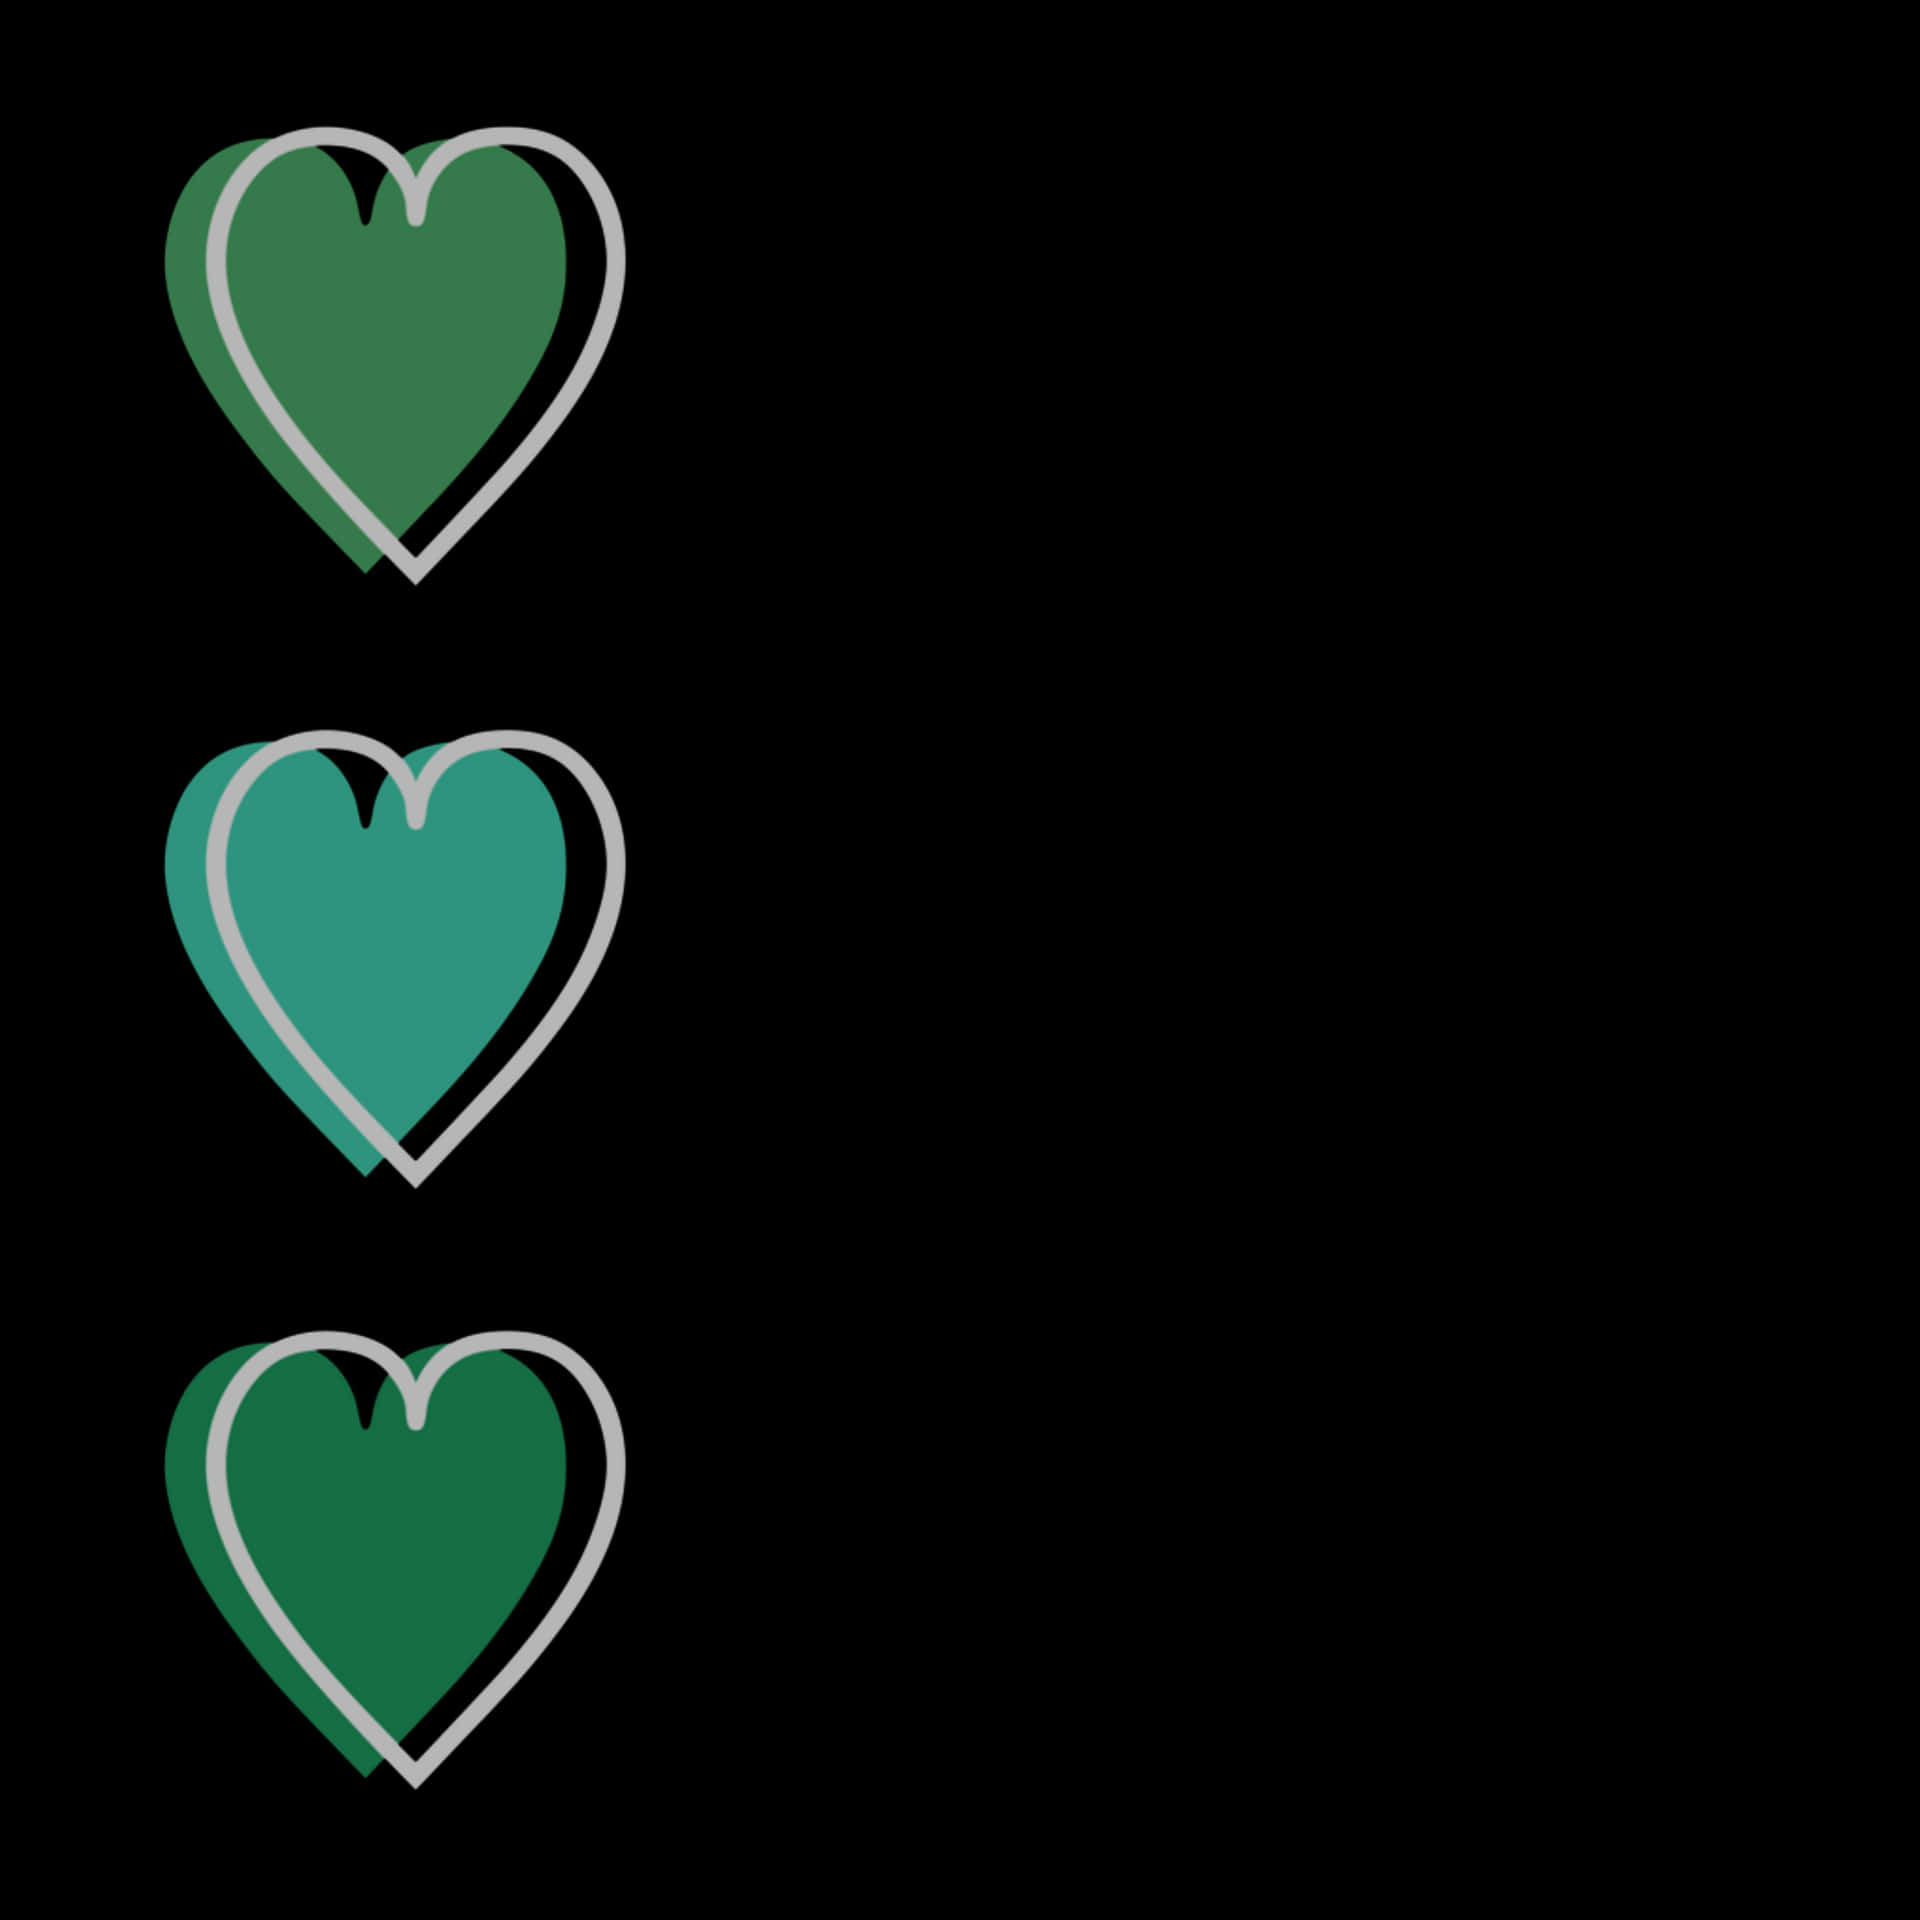 Find love with a mint green heart Wallpaper